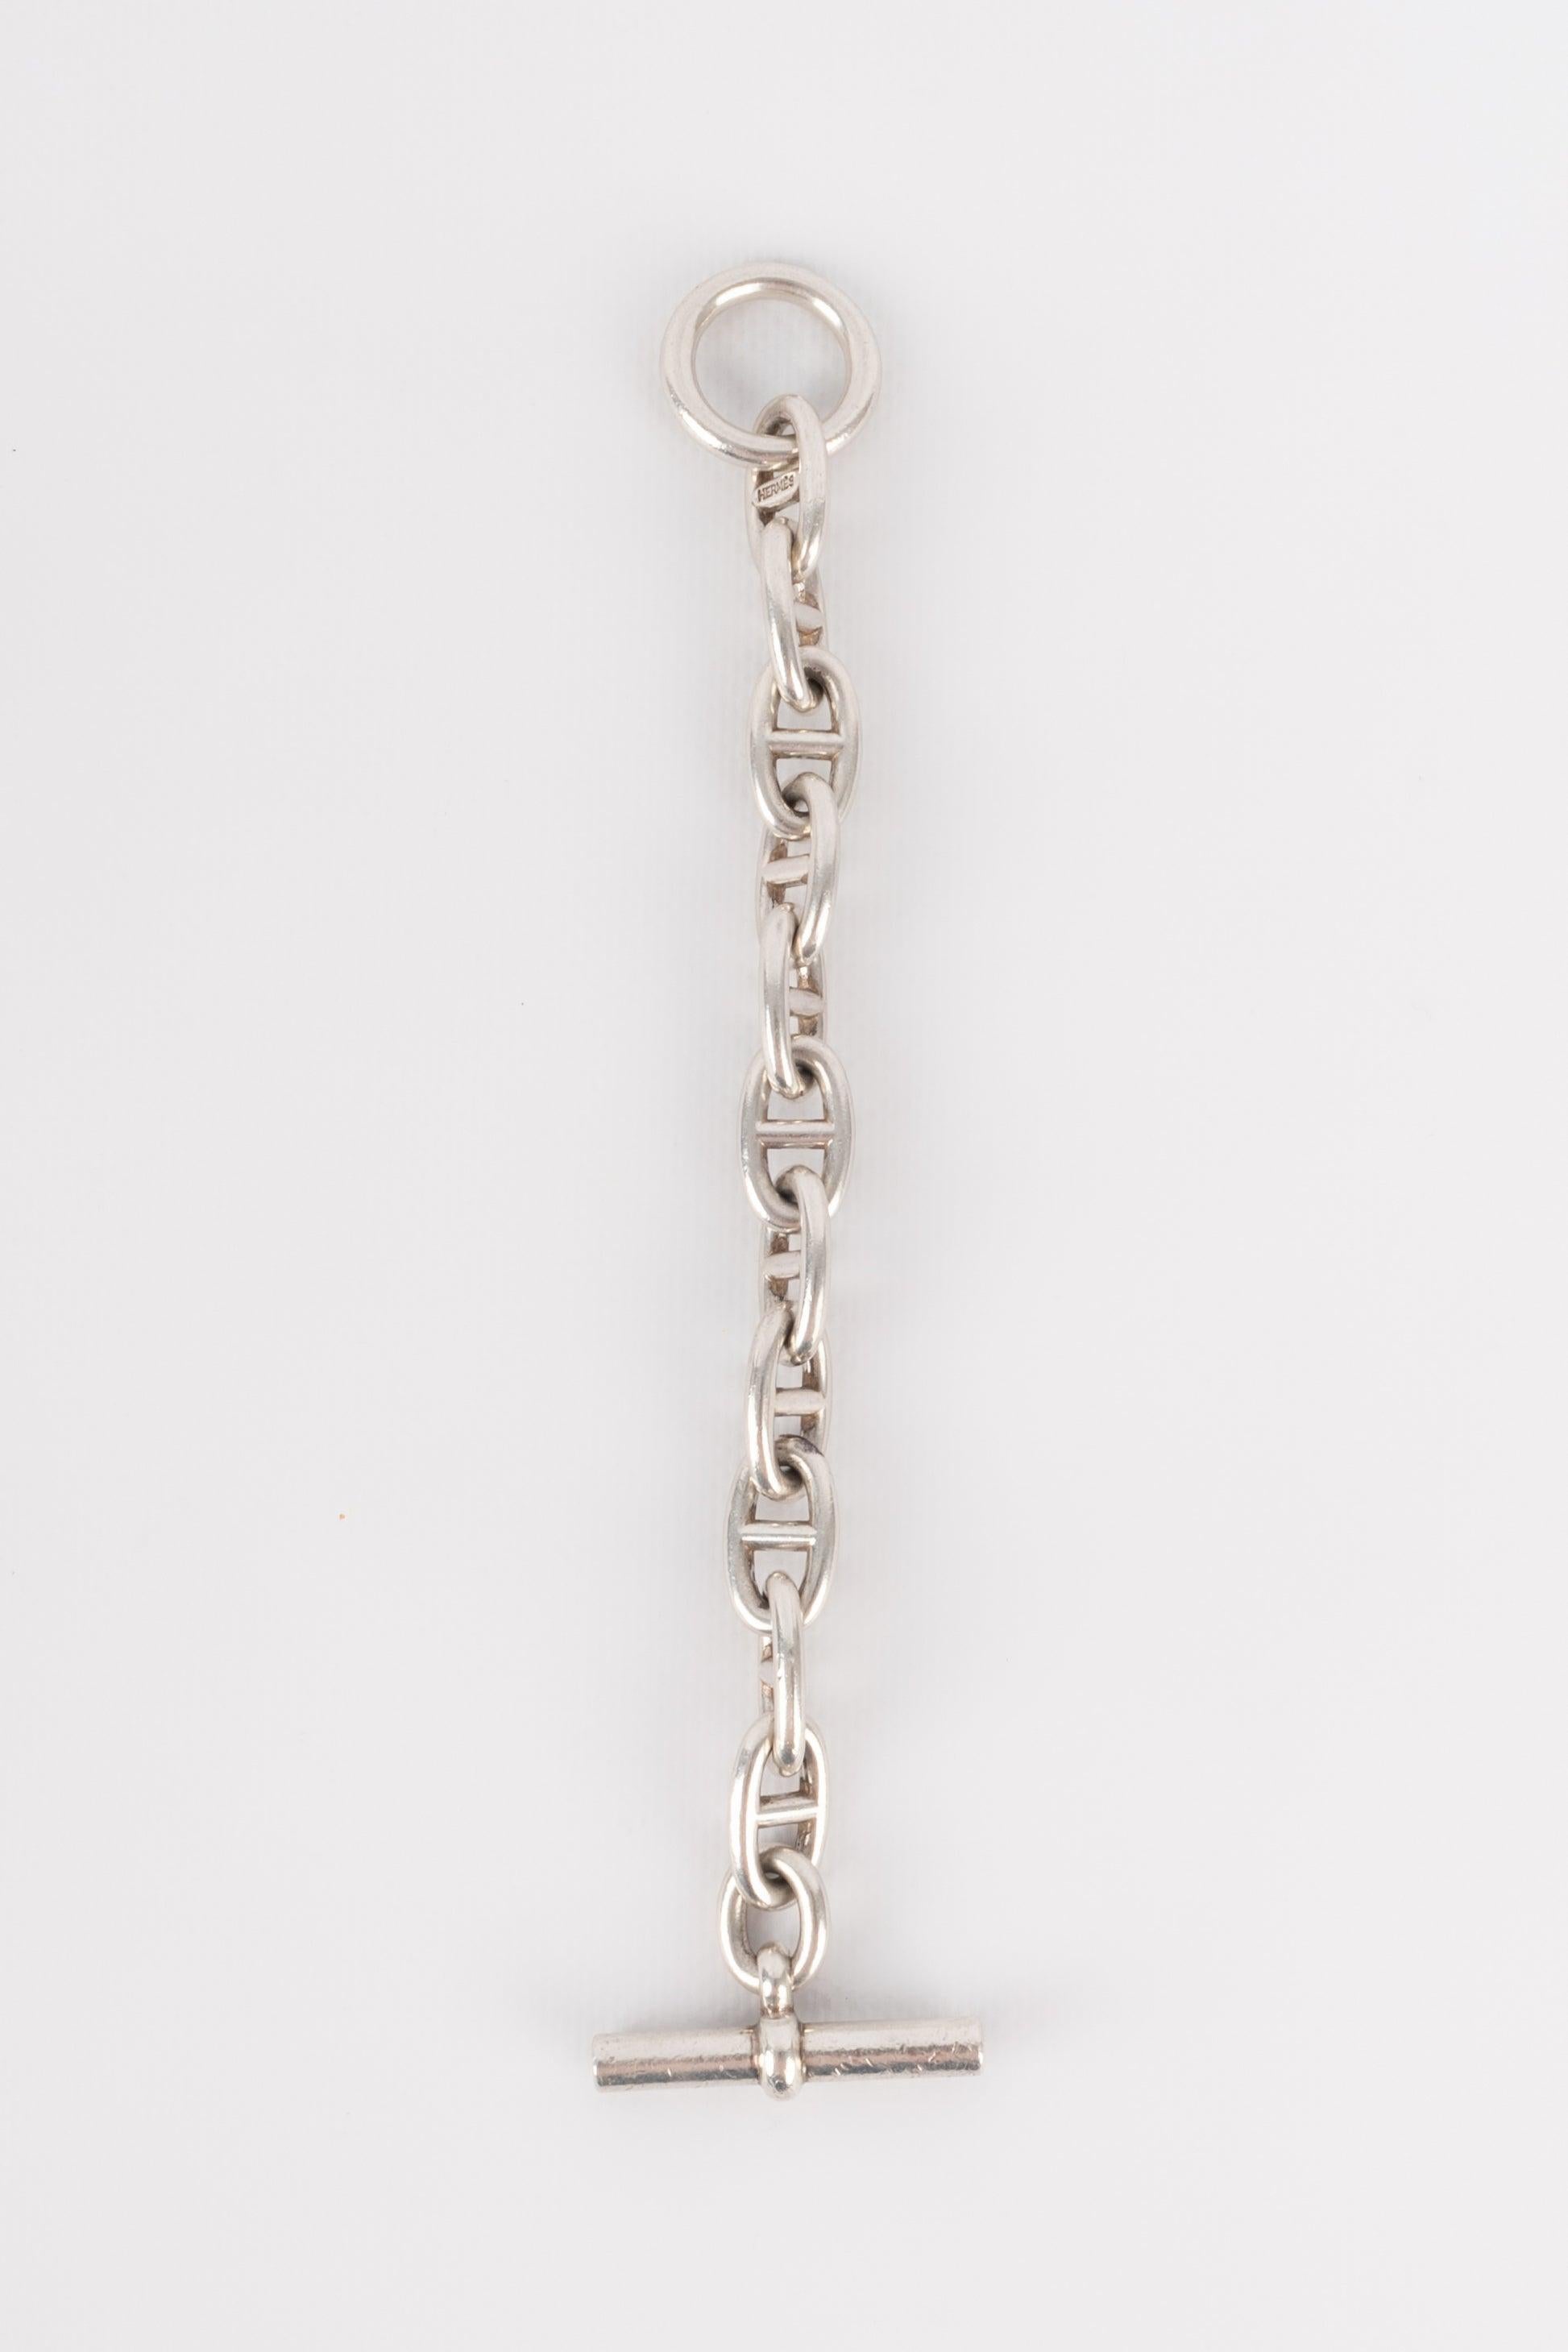 Hermès - (Made in France) Silver anchor chain bracelet.

Additional information: 
Condition: Good condition
Dimensions: Length: 21.5 cm

Seller Reference: BRA33